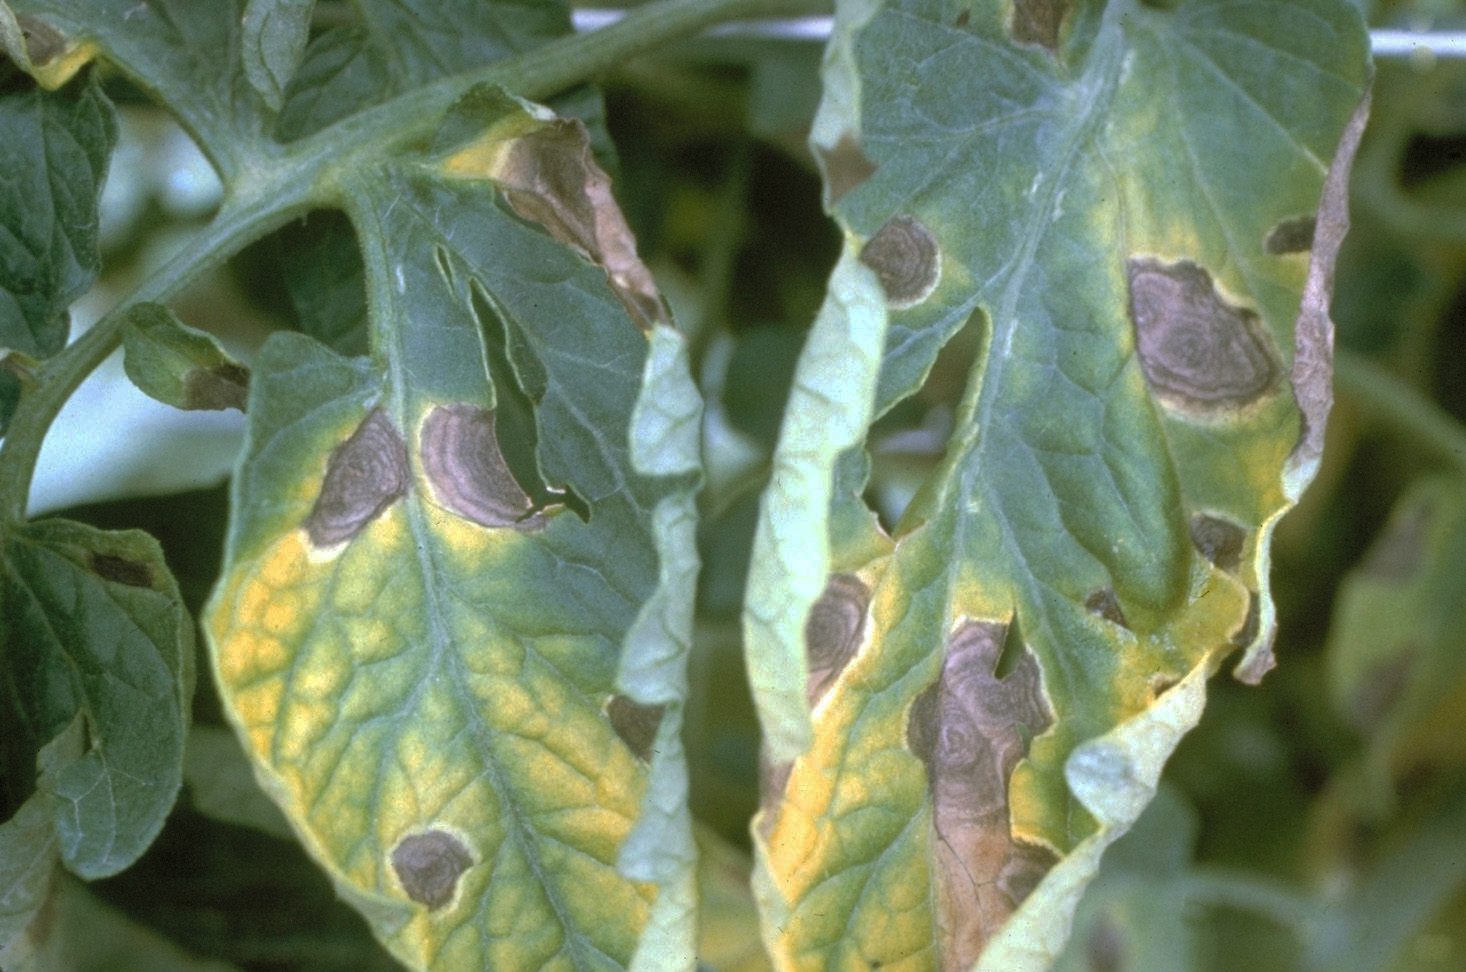 Close-up of early blight lesions.